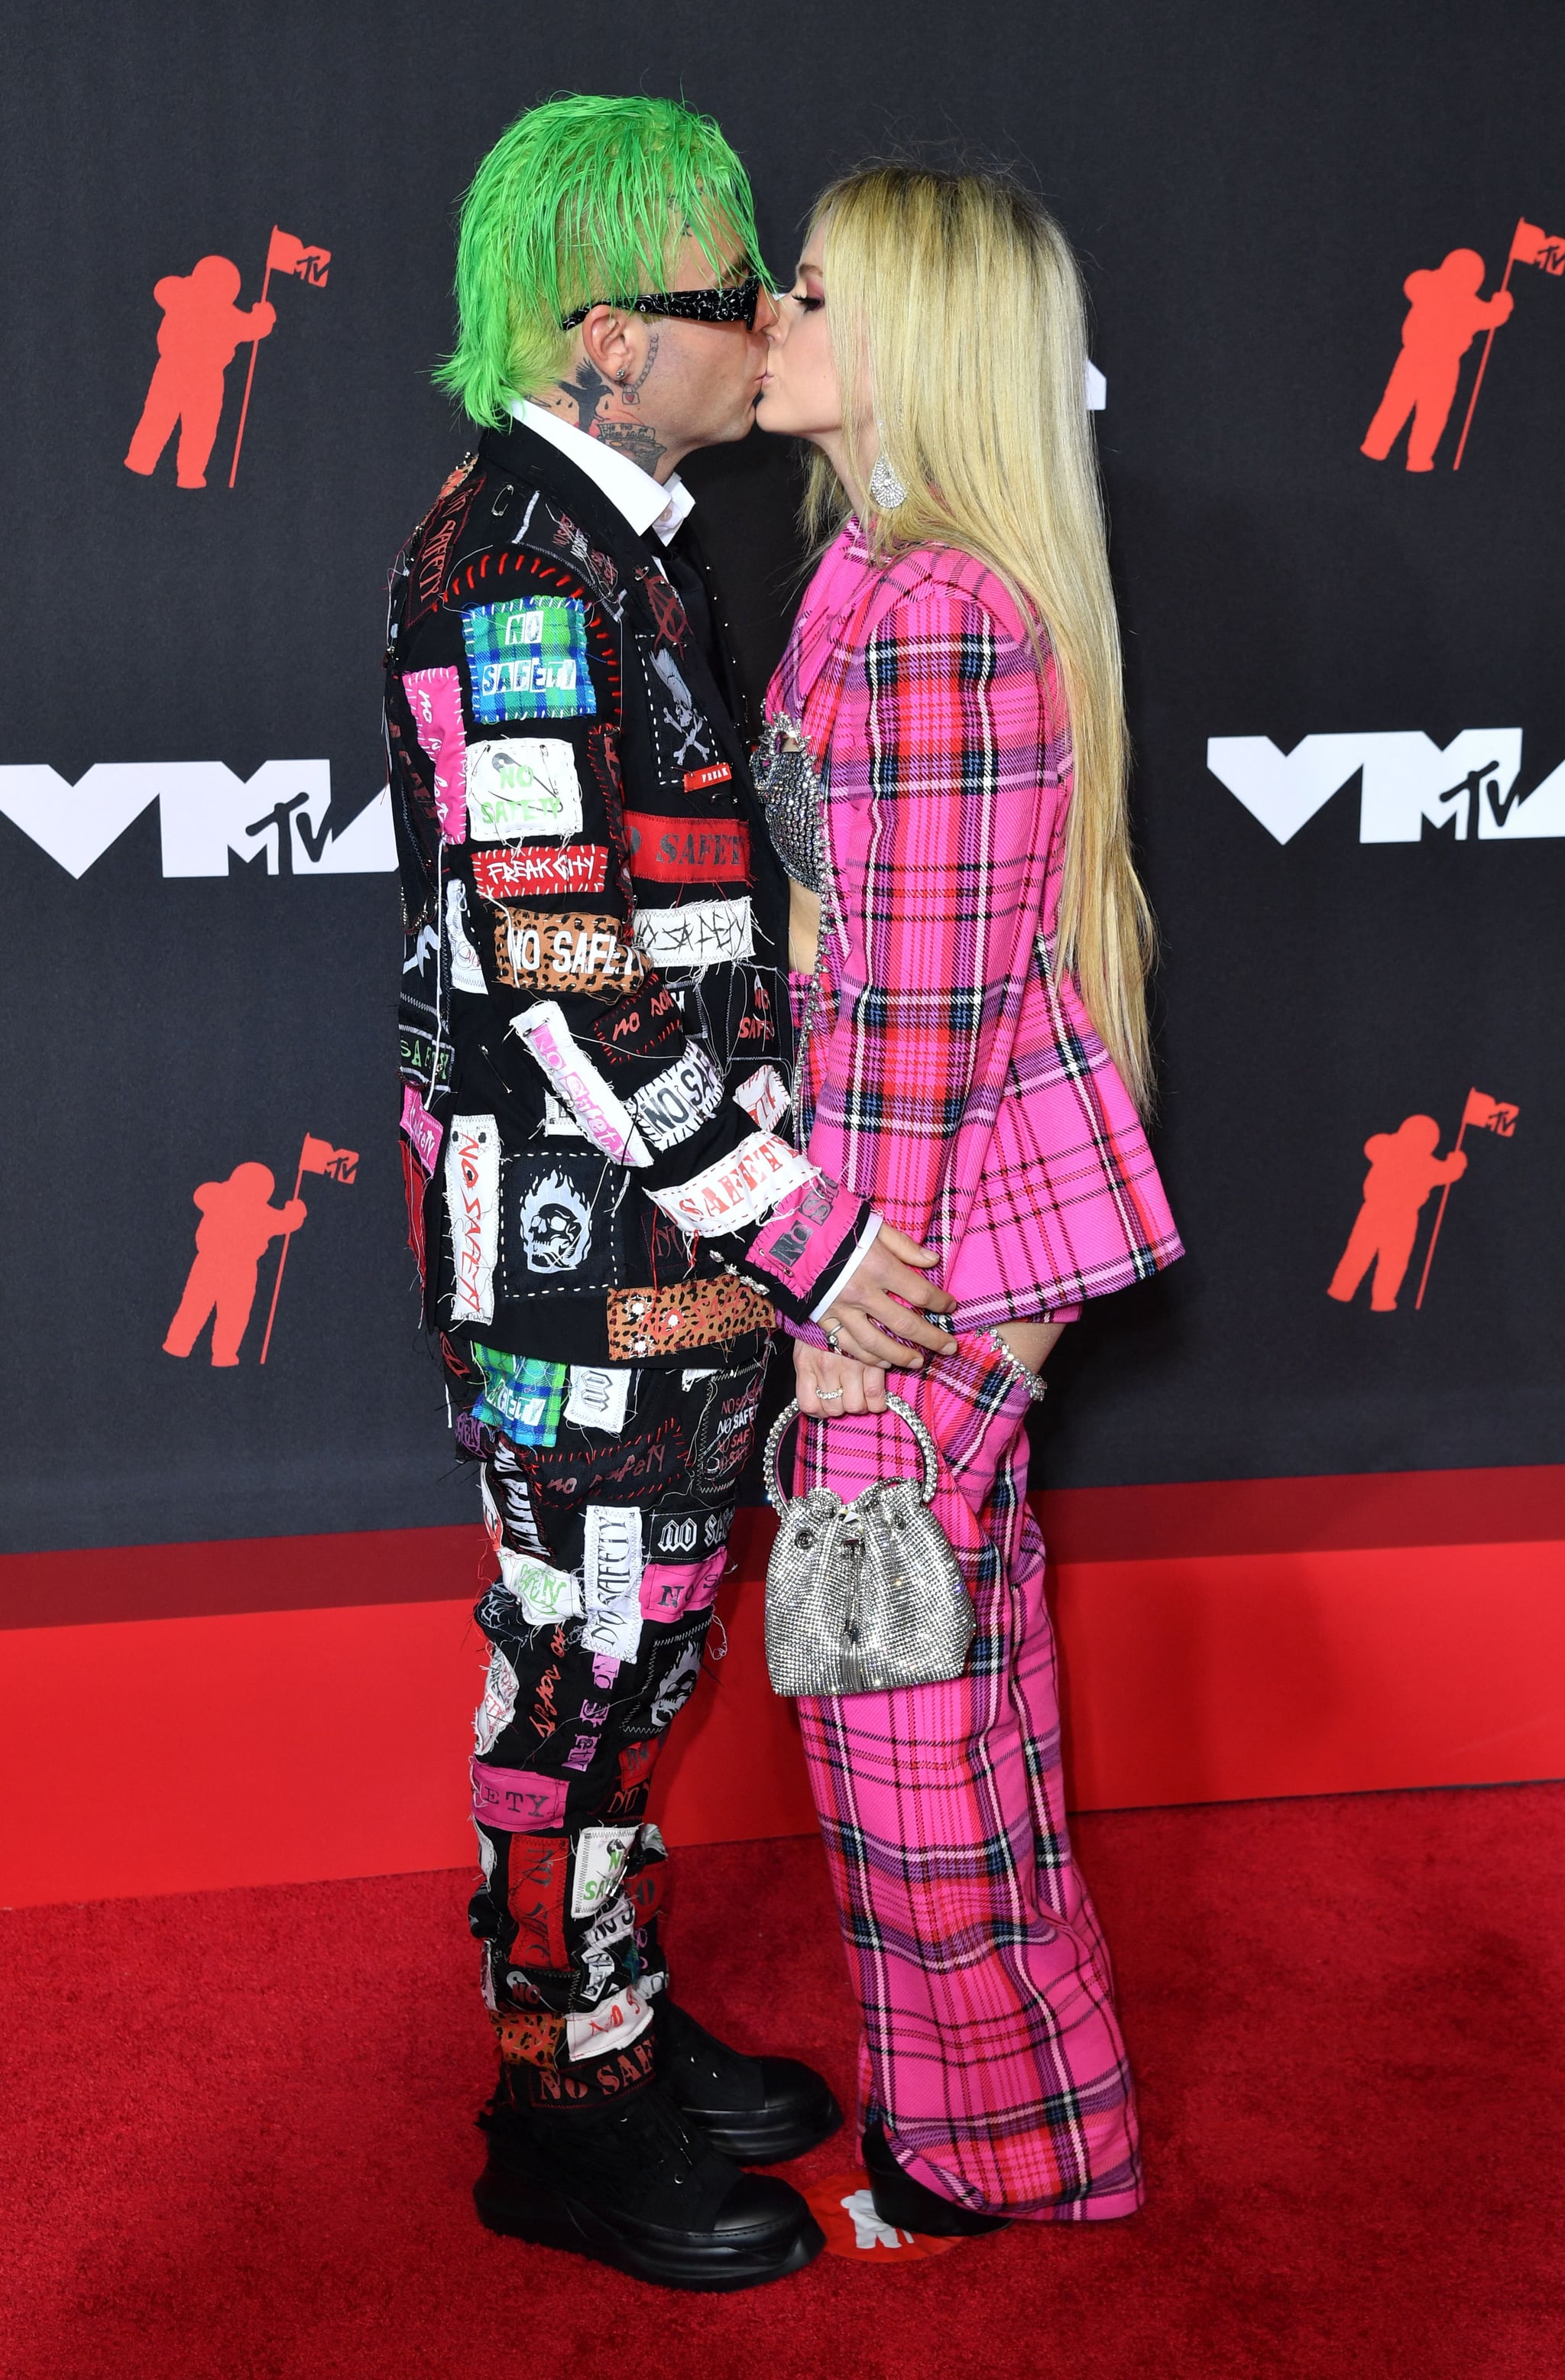 Avril posed with her partner Mod Sun.